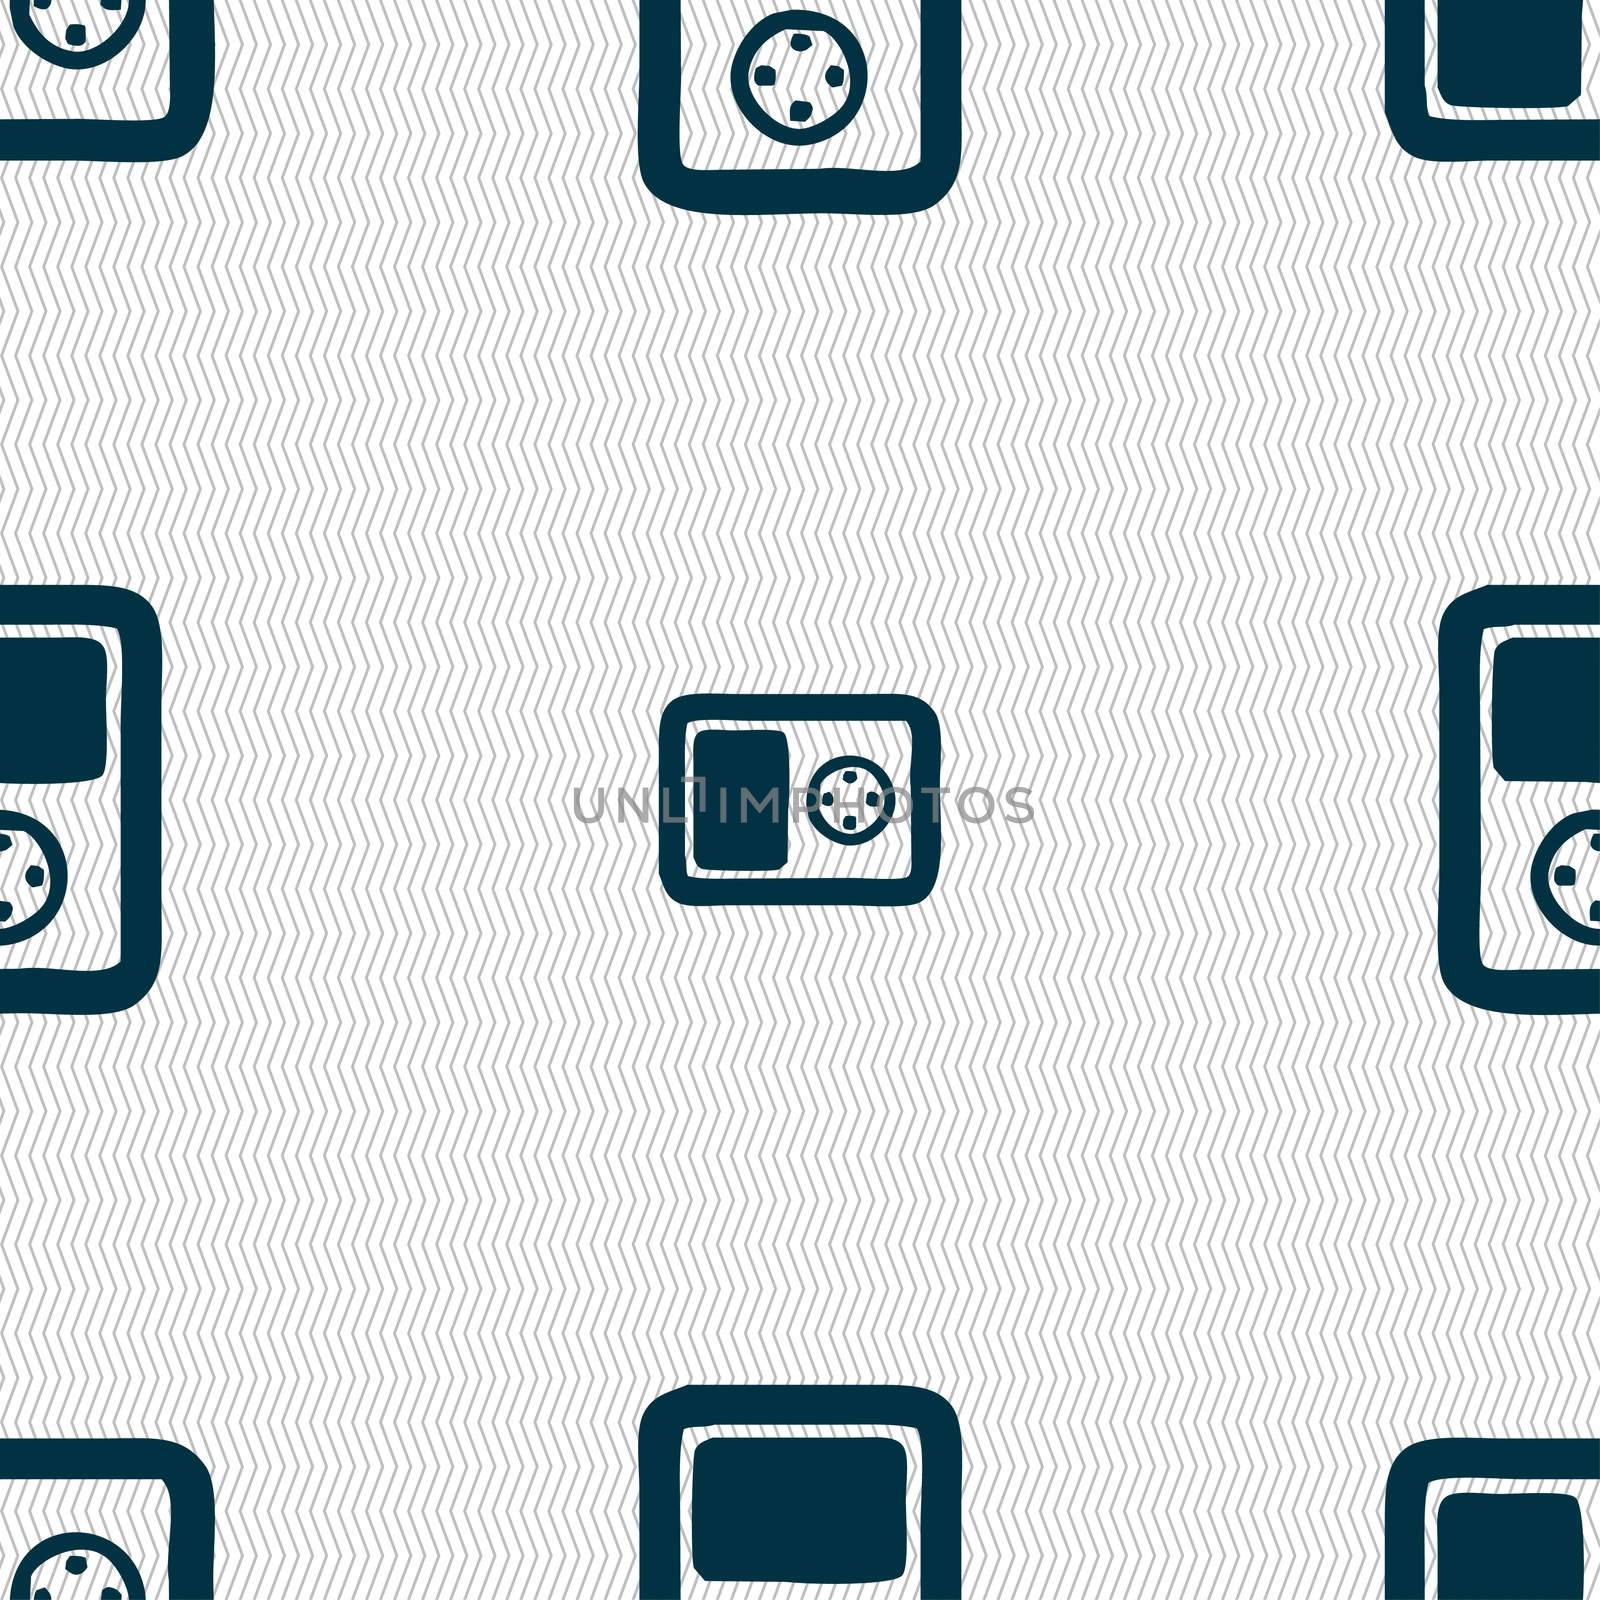 Tetris, video game console icon sign. Seamless pattern with geometric texture. illustration